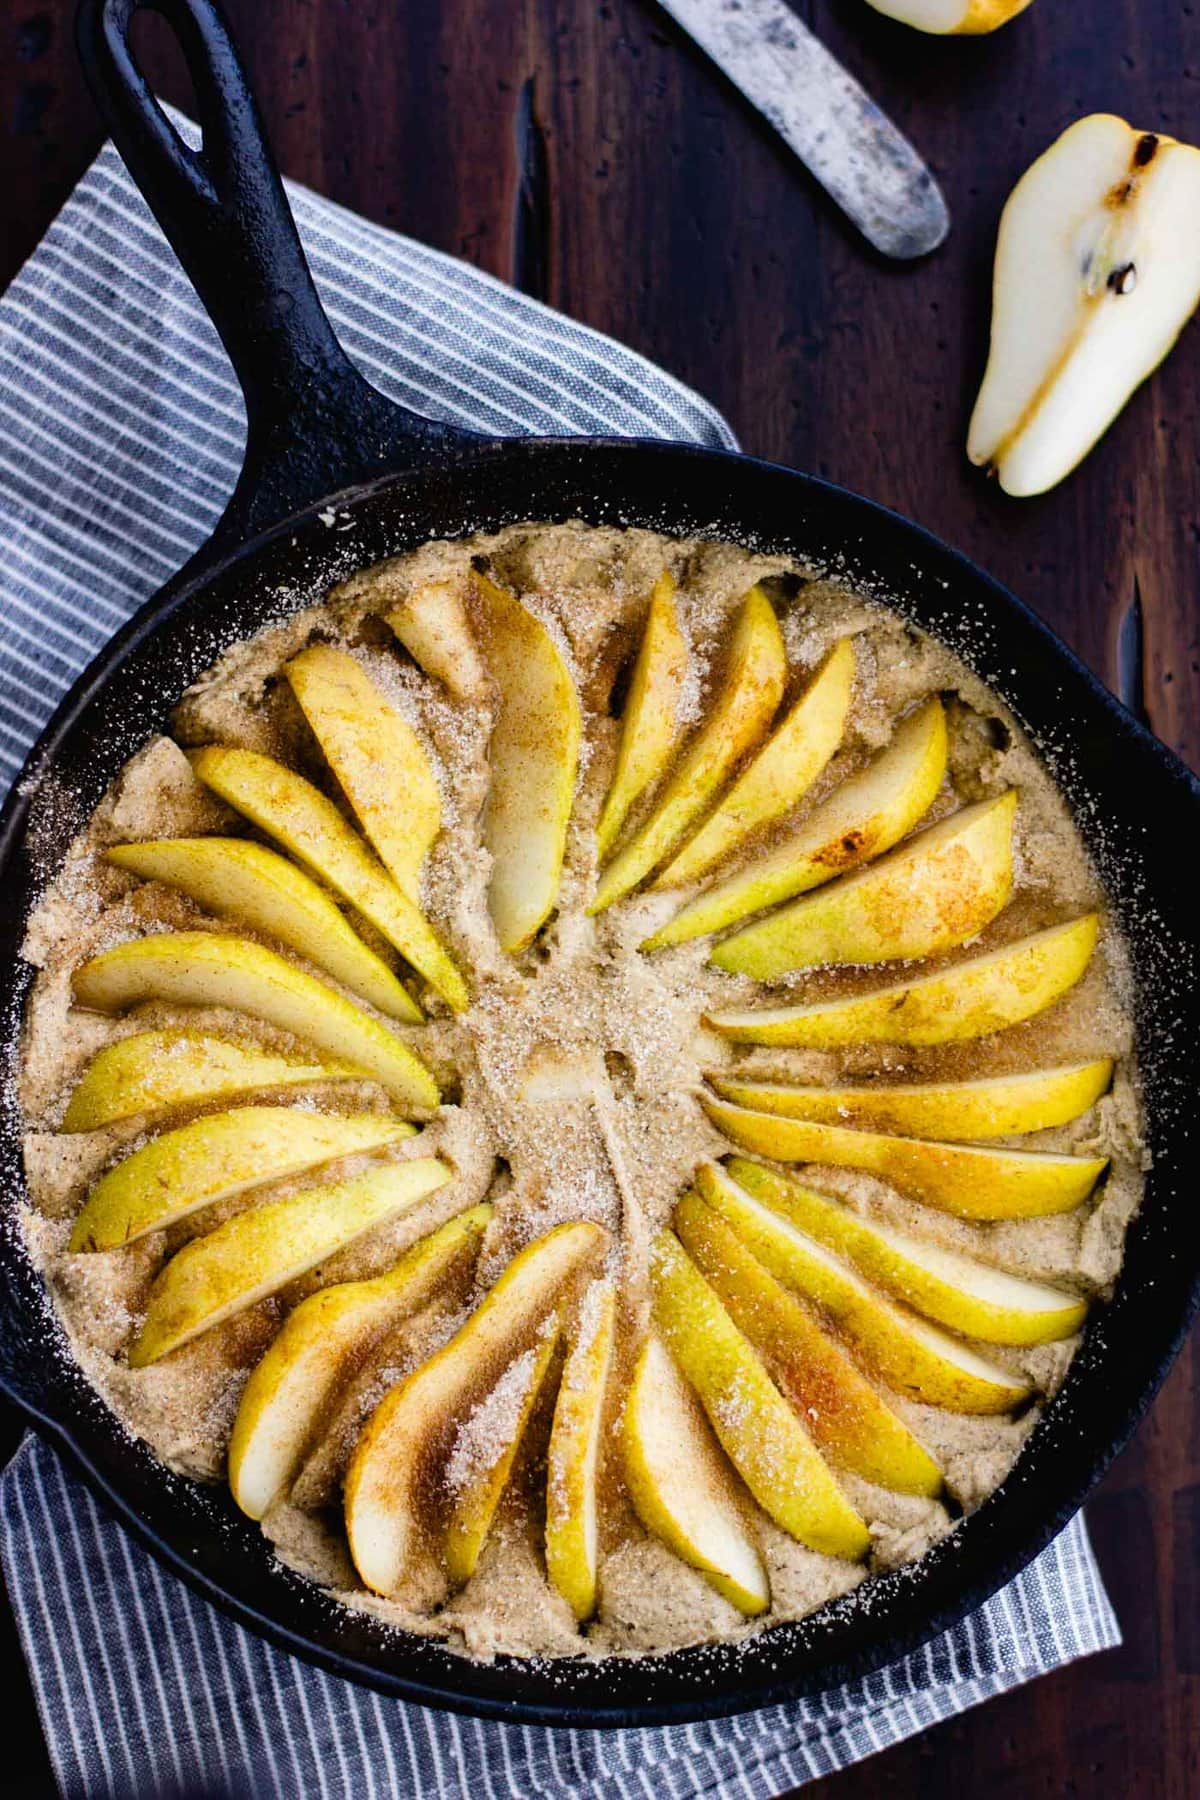 Pear wedges have been arranged on top of the cake batter in a cast iron skillet